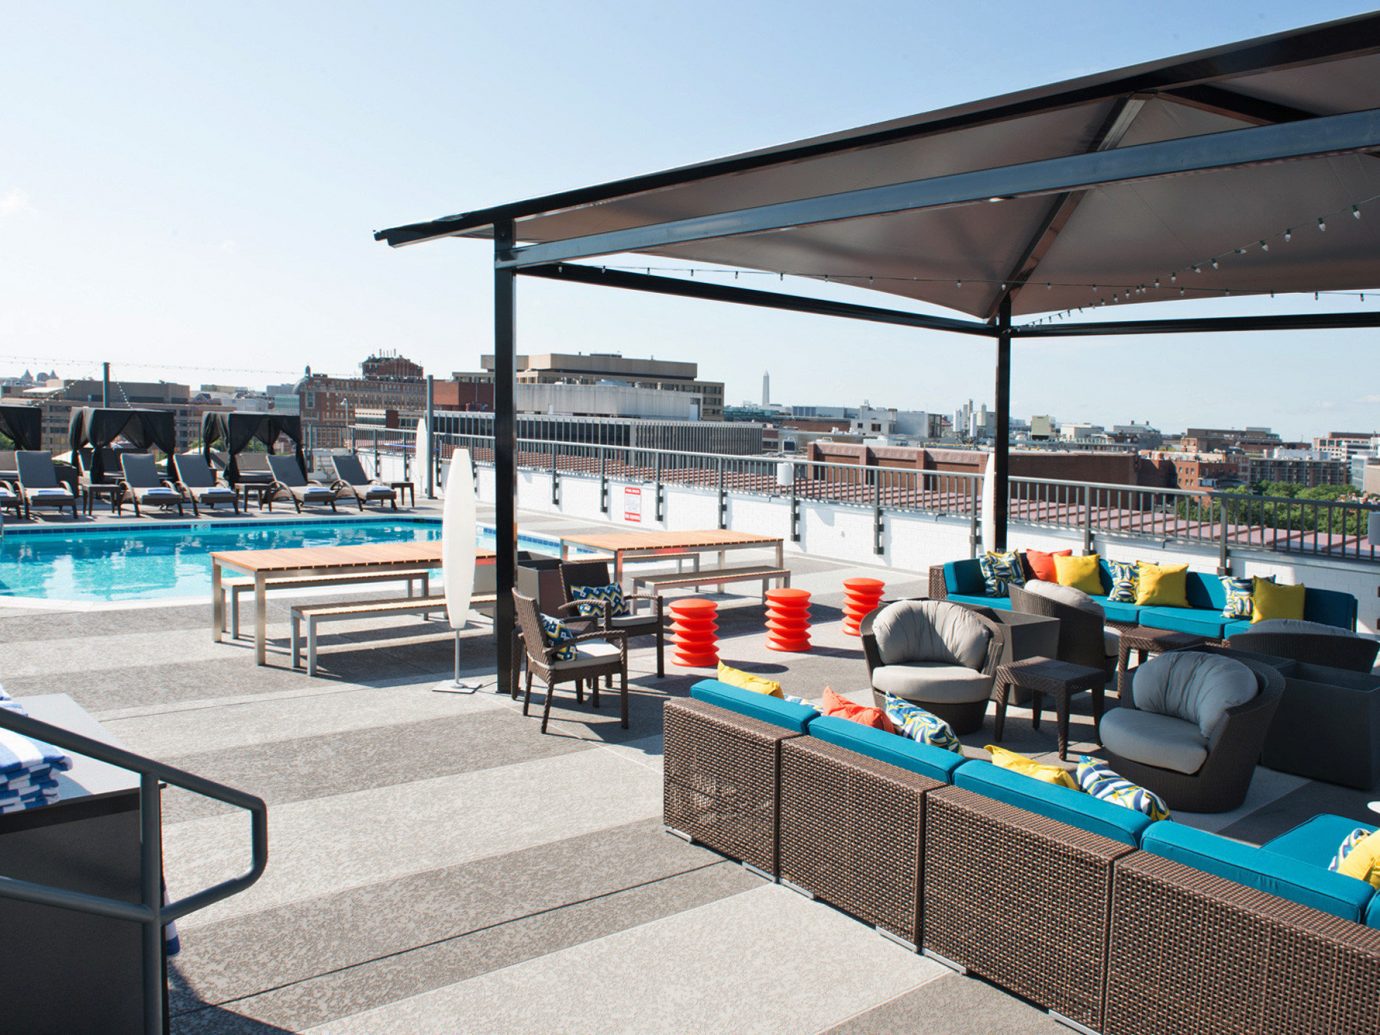 Bar Boutique City Hip Hotels Lounge Pool Rooftop sky outdoor vehicle restaurant dock